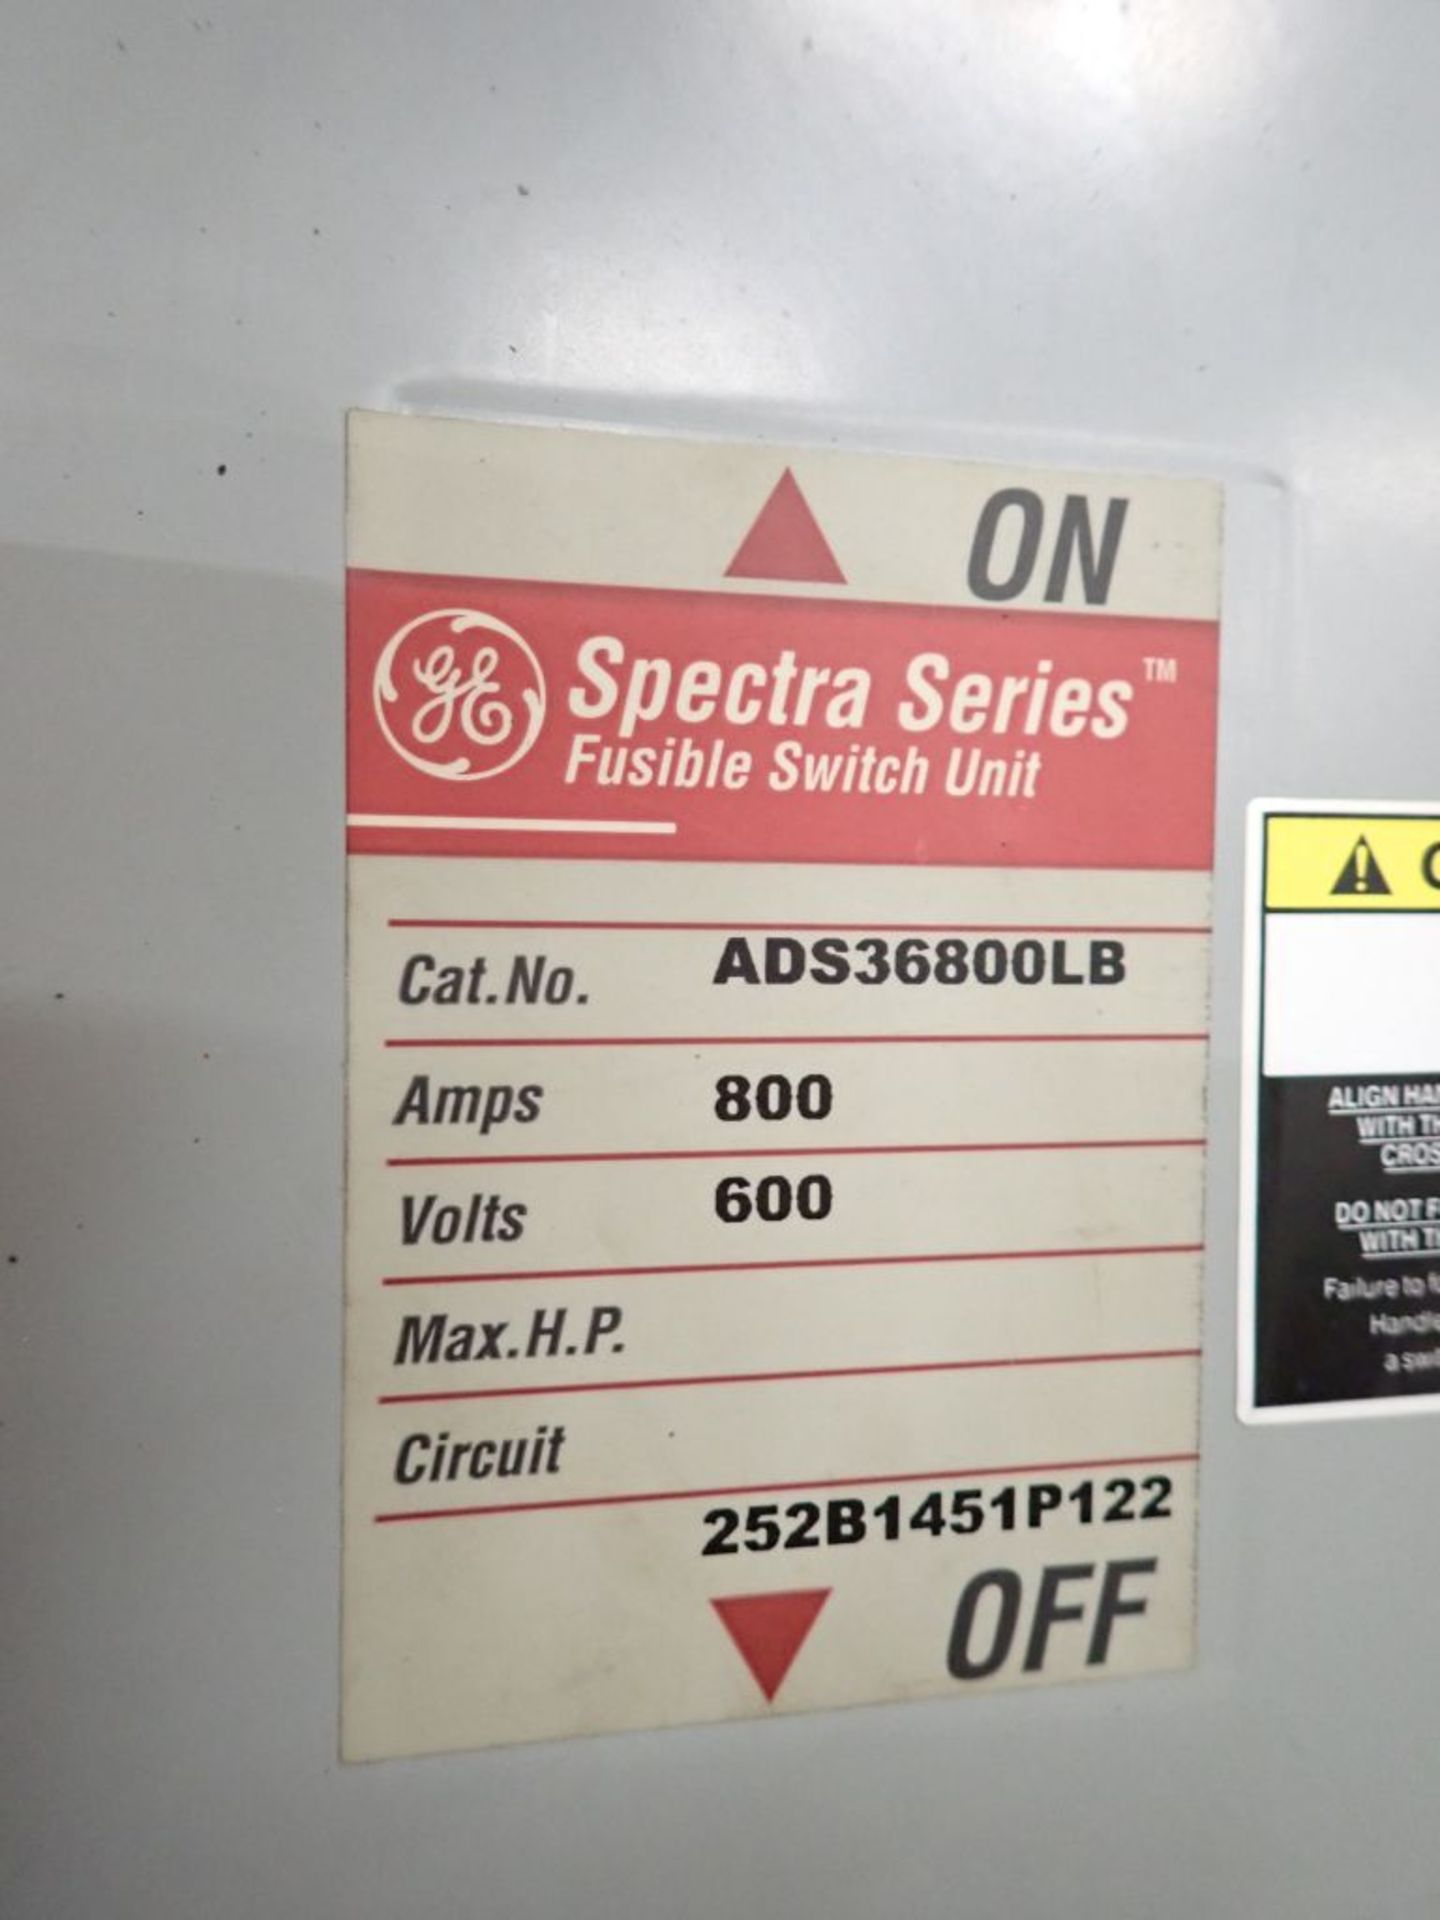 GE Spectra Series Fusible Switch Unit - Image 9 of 18